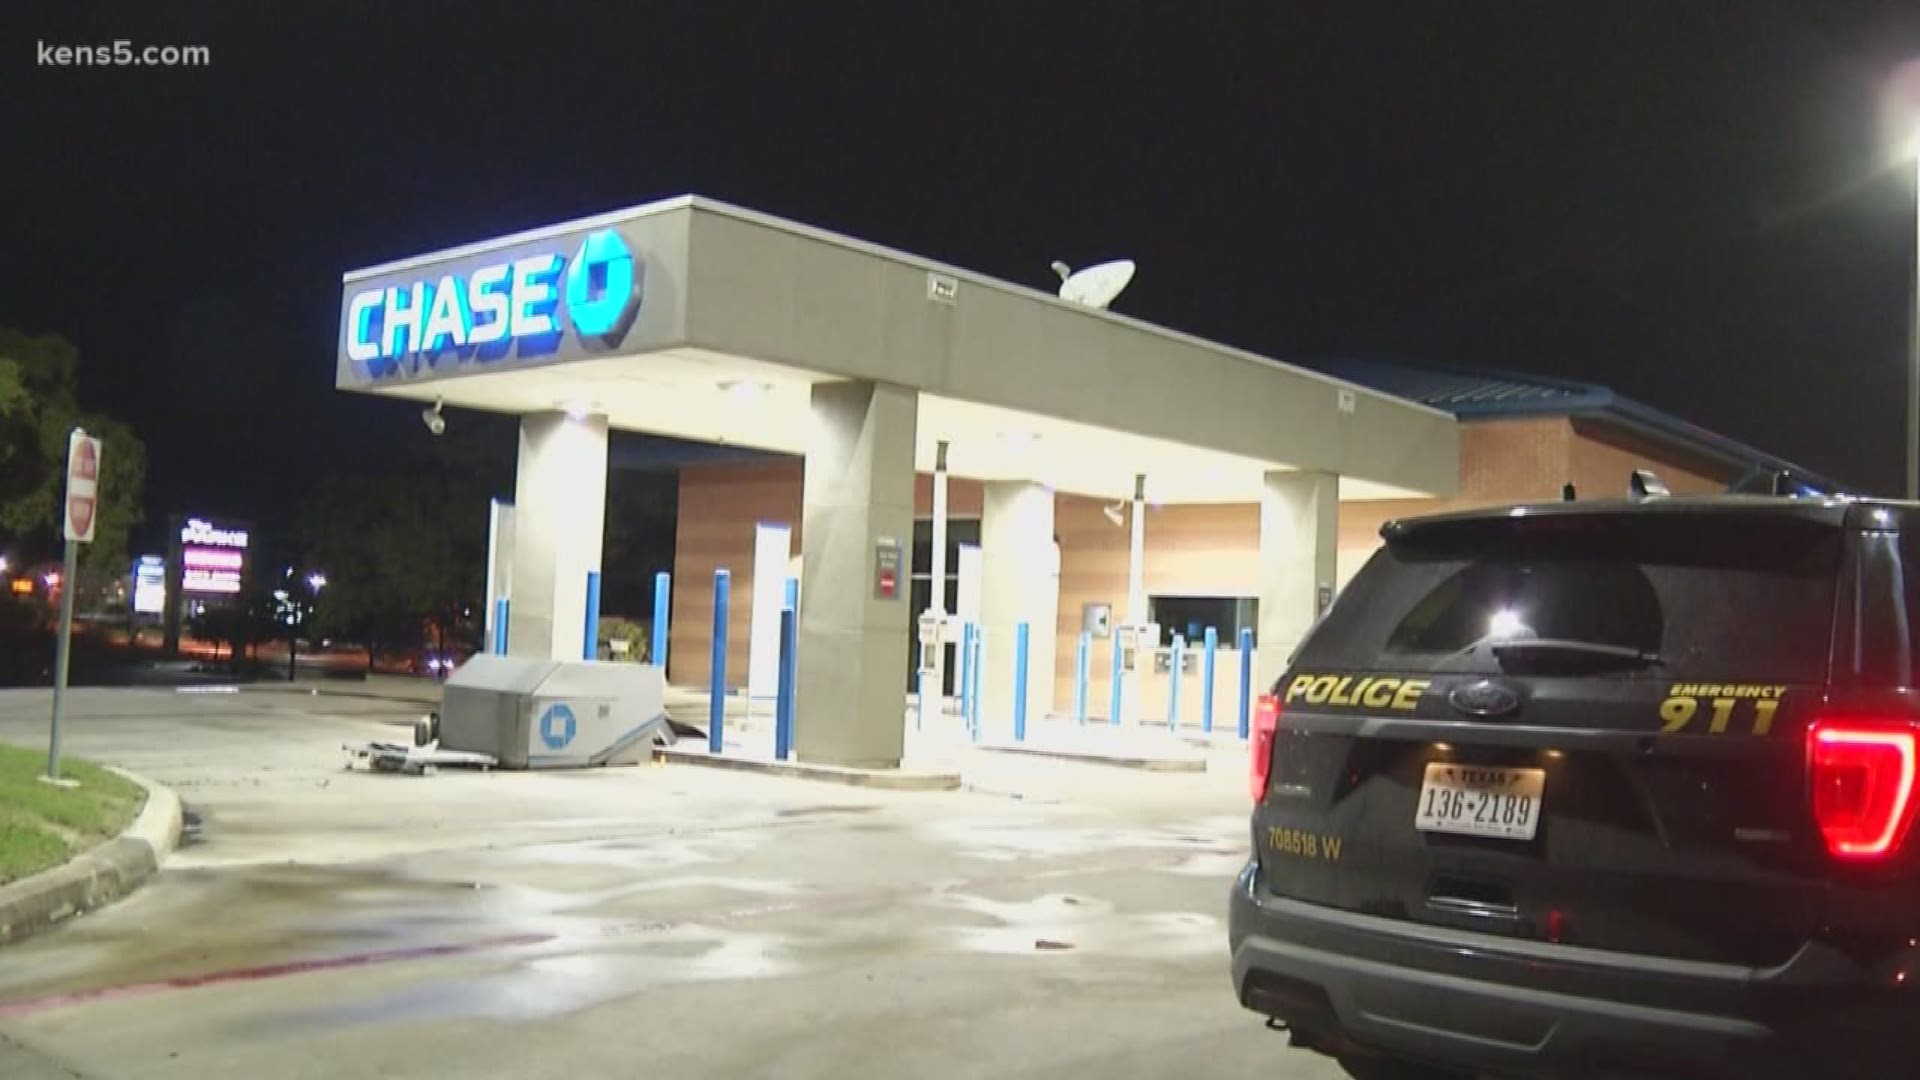 Robbers tried to steal an ATM from a Chase Bank early Wednesday morning in San Antonio.